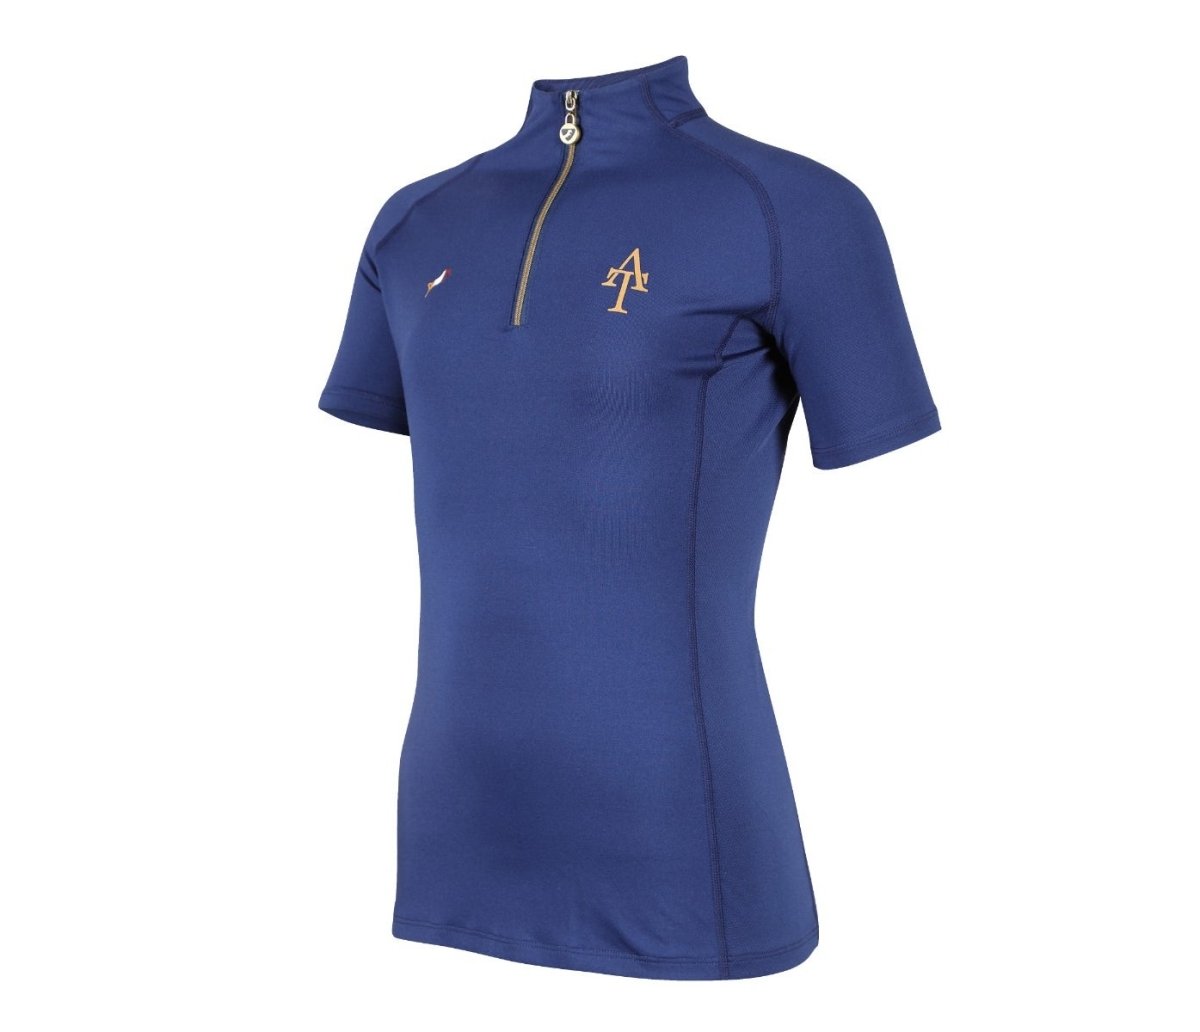 Aubrion SS24 Team Short Sleeve Base Layer - Young Rider - Navy - 11/12 Years